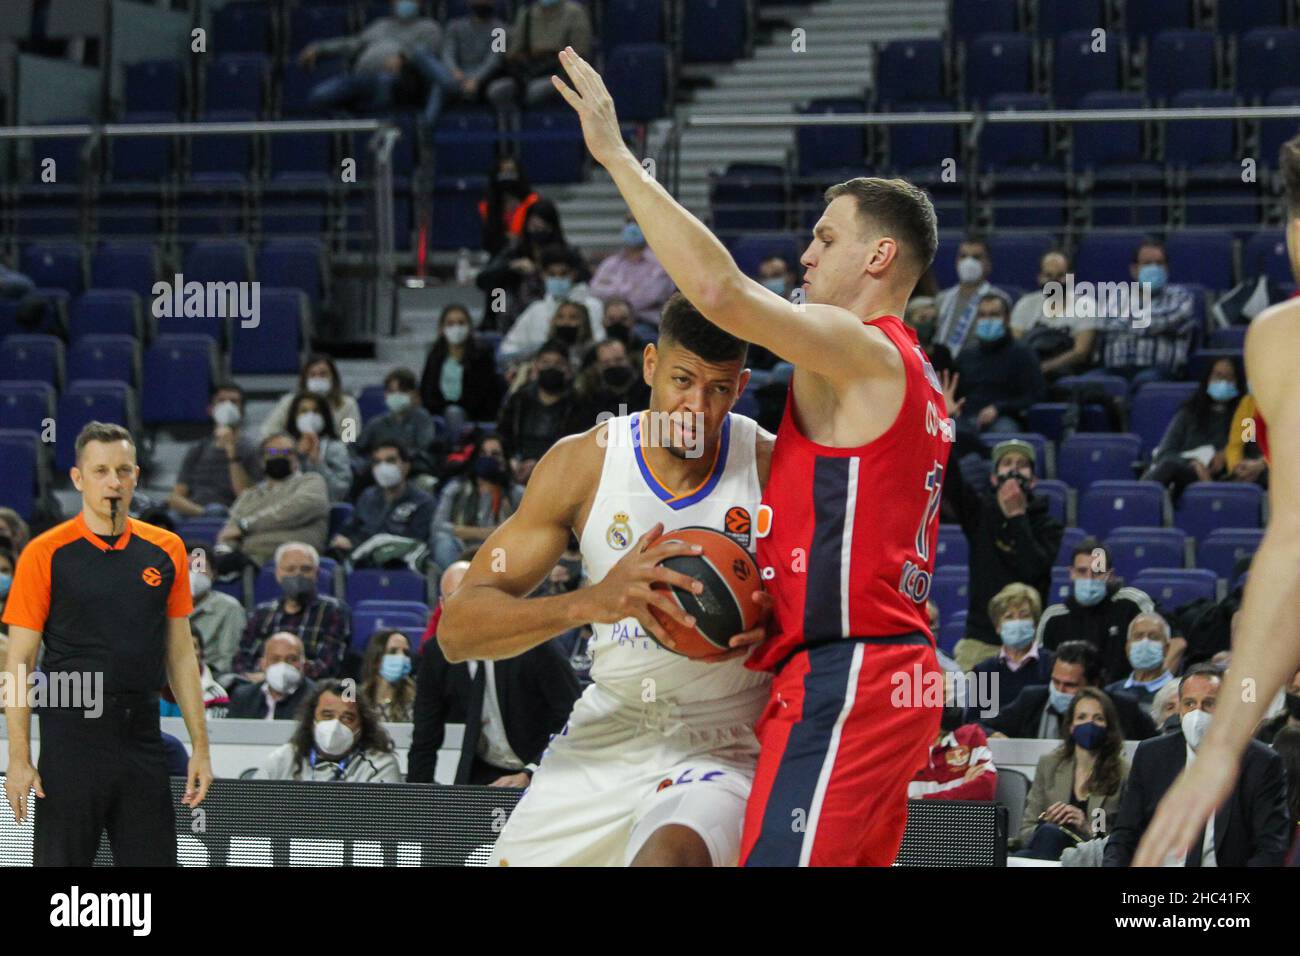 Walter Samuel Tavares da Veiga of Real Madrid and Johannes Voigtmann of CSKA Moscow in action during the Turkish Airlines Euroleague basketball match between Real Madrid and CSKA Moscow on December 23, 2021 at Wizink Center in Madrid, Spain - Photo:  Irh/DPPI/LiveMedia Stock Photo